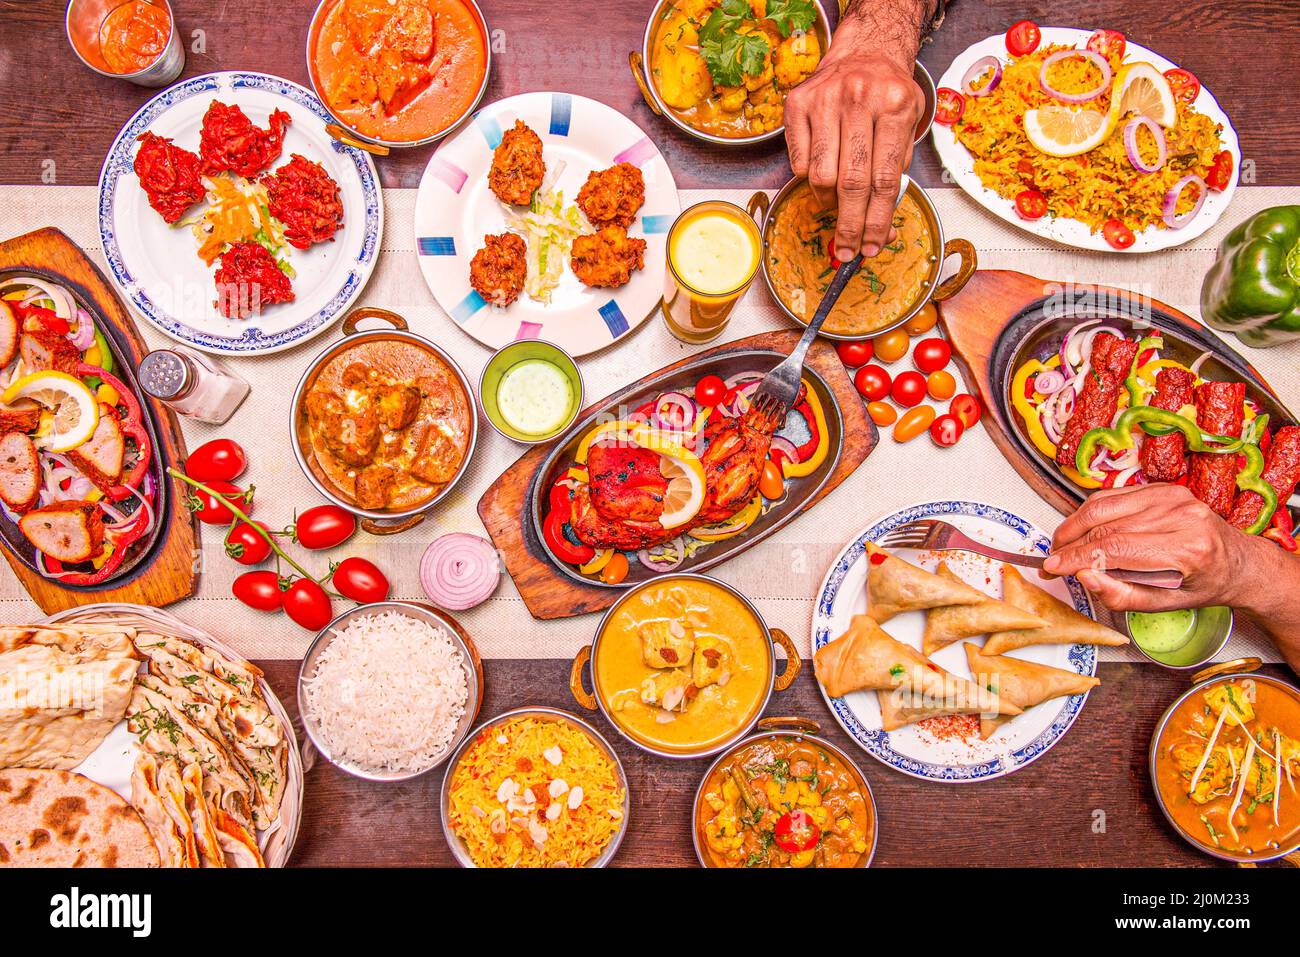 Set of Indian food dishes with hands poking the chicken tikka masala, another on the stuffed samosas and curry Stock Photo